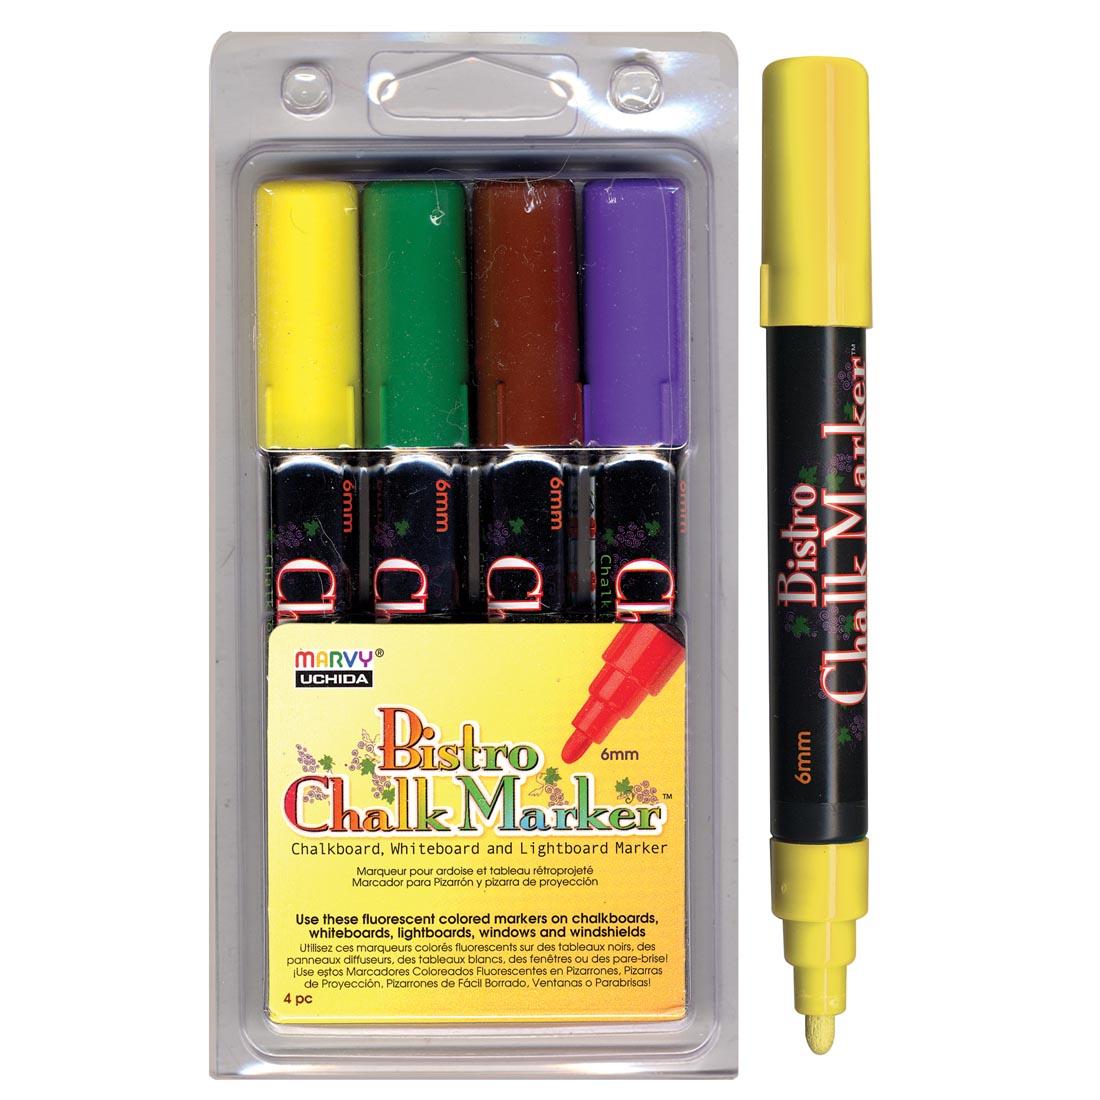 Marvy Bistro Chalk Marker Set D in package next to an individual yellow marker with cap on opposite end